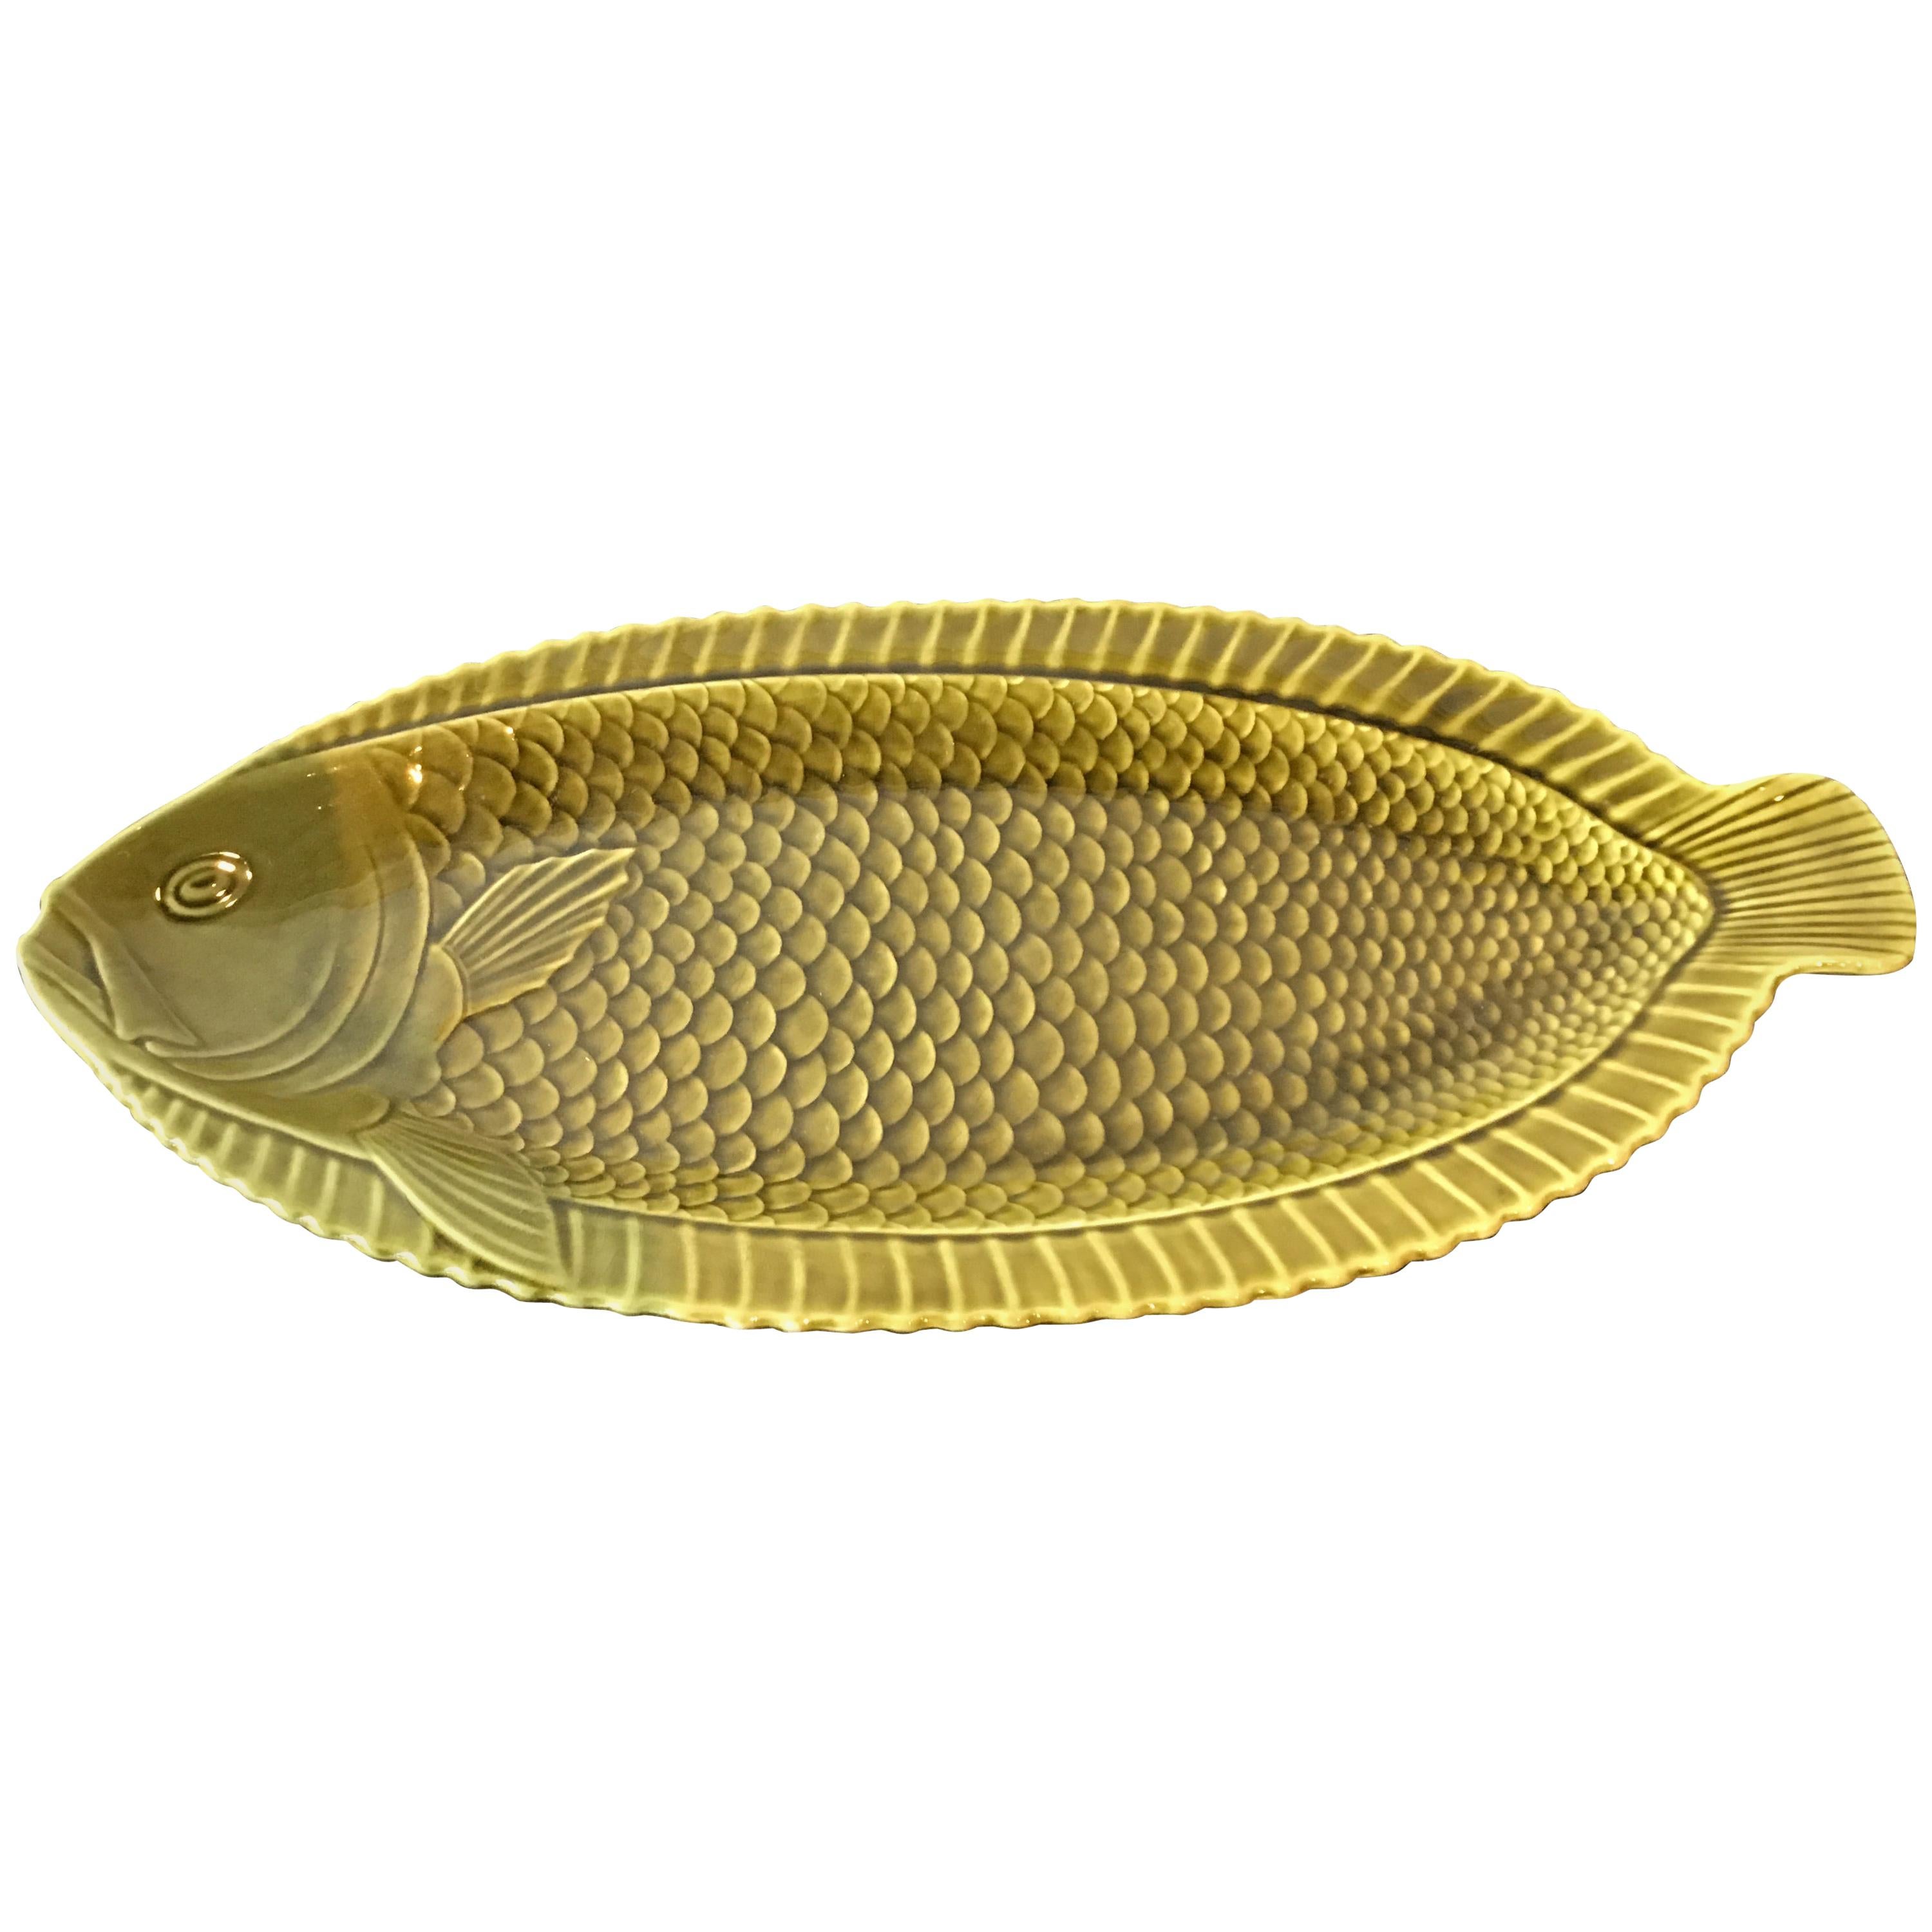 1940s French Green Majolica Fish Platter by Sarreguemines